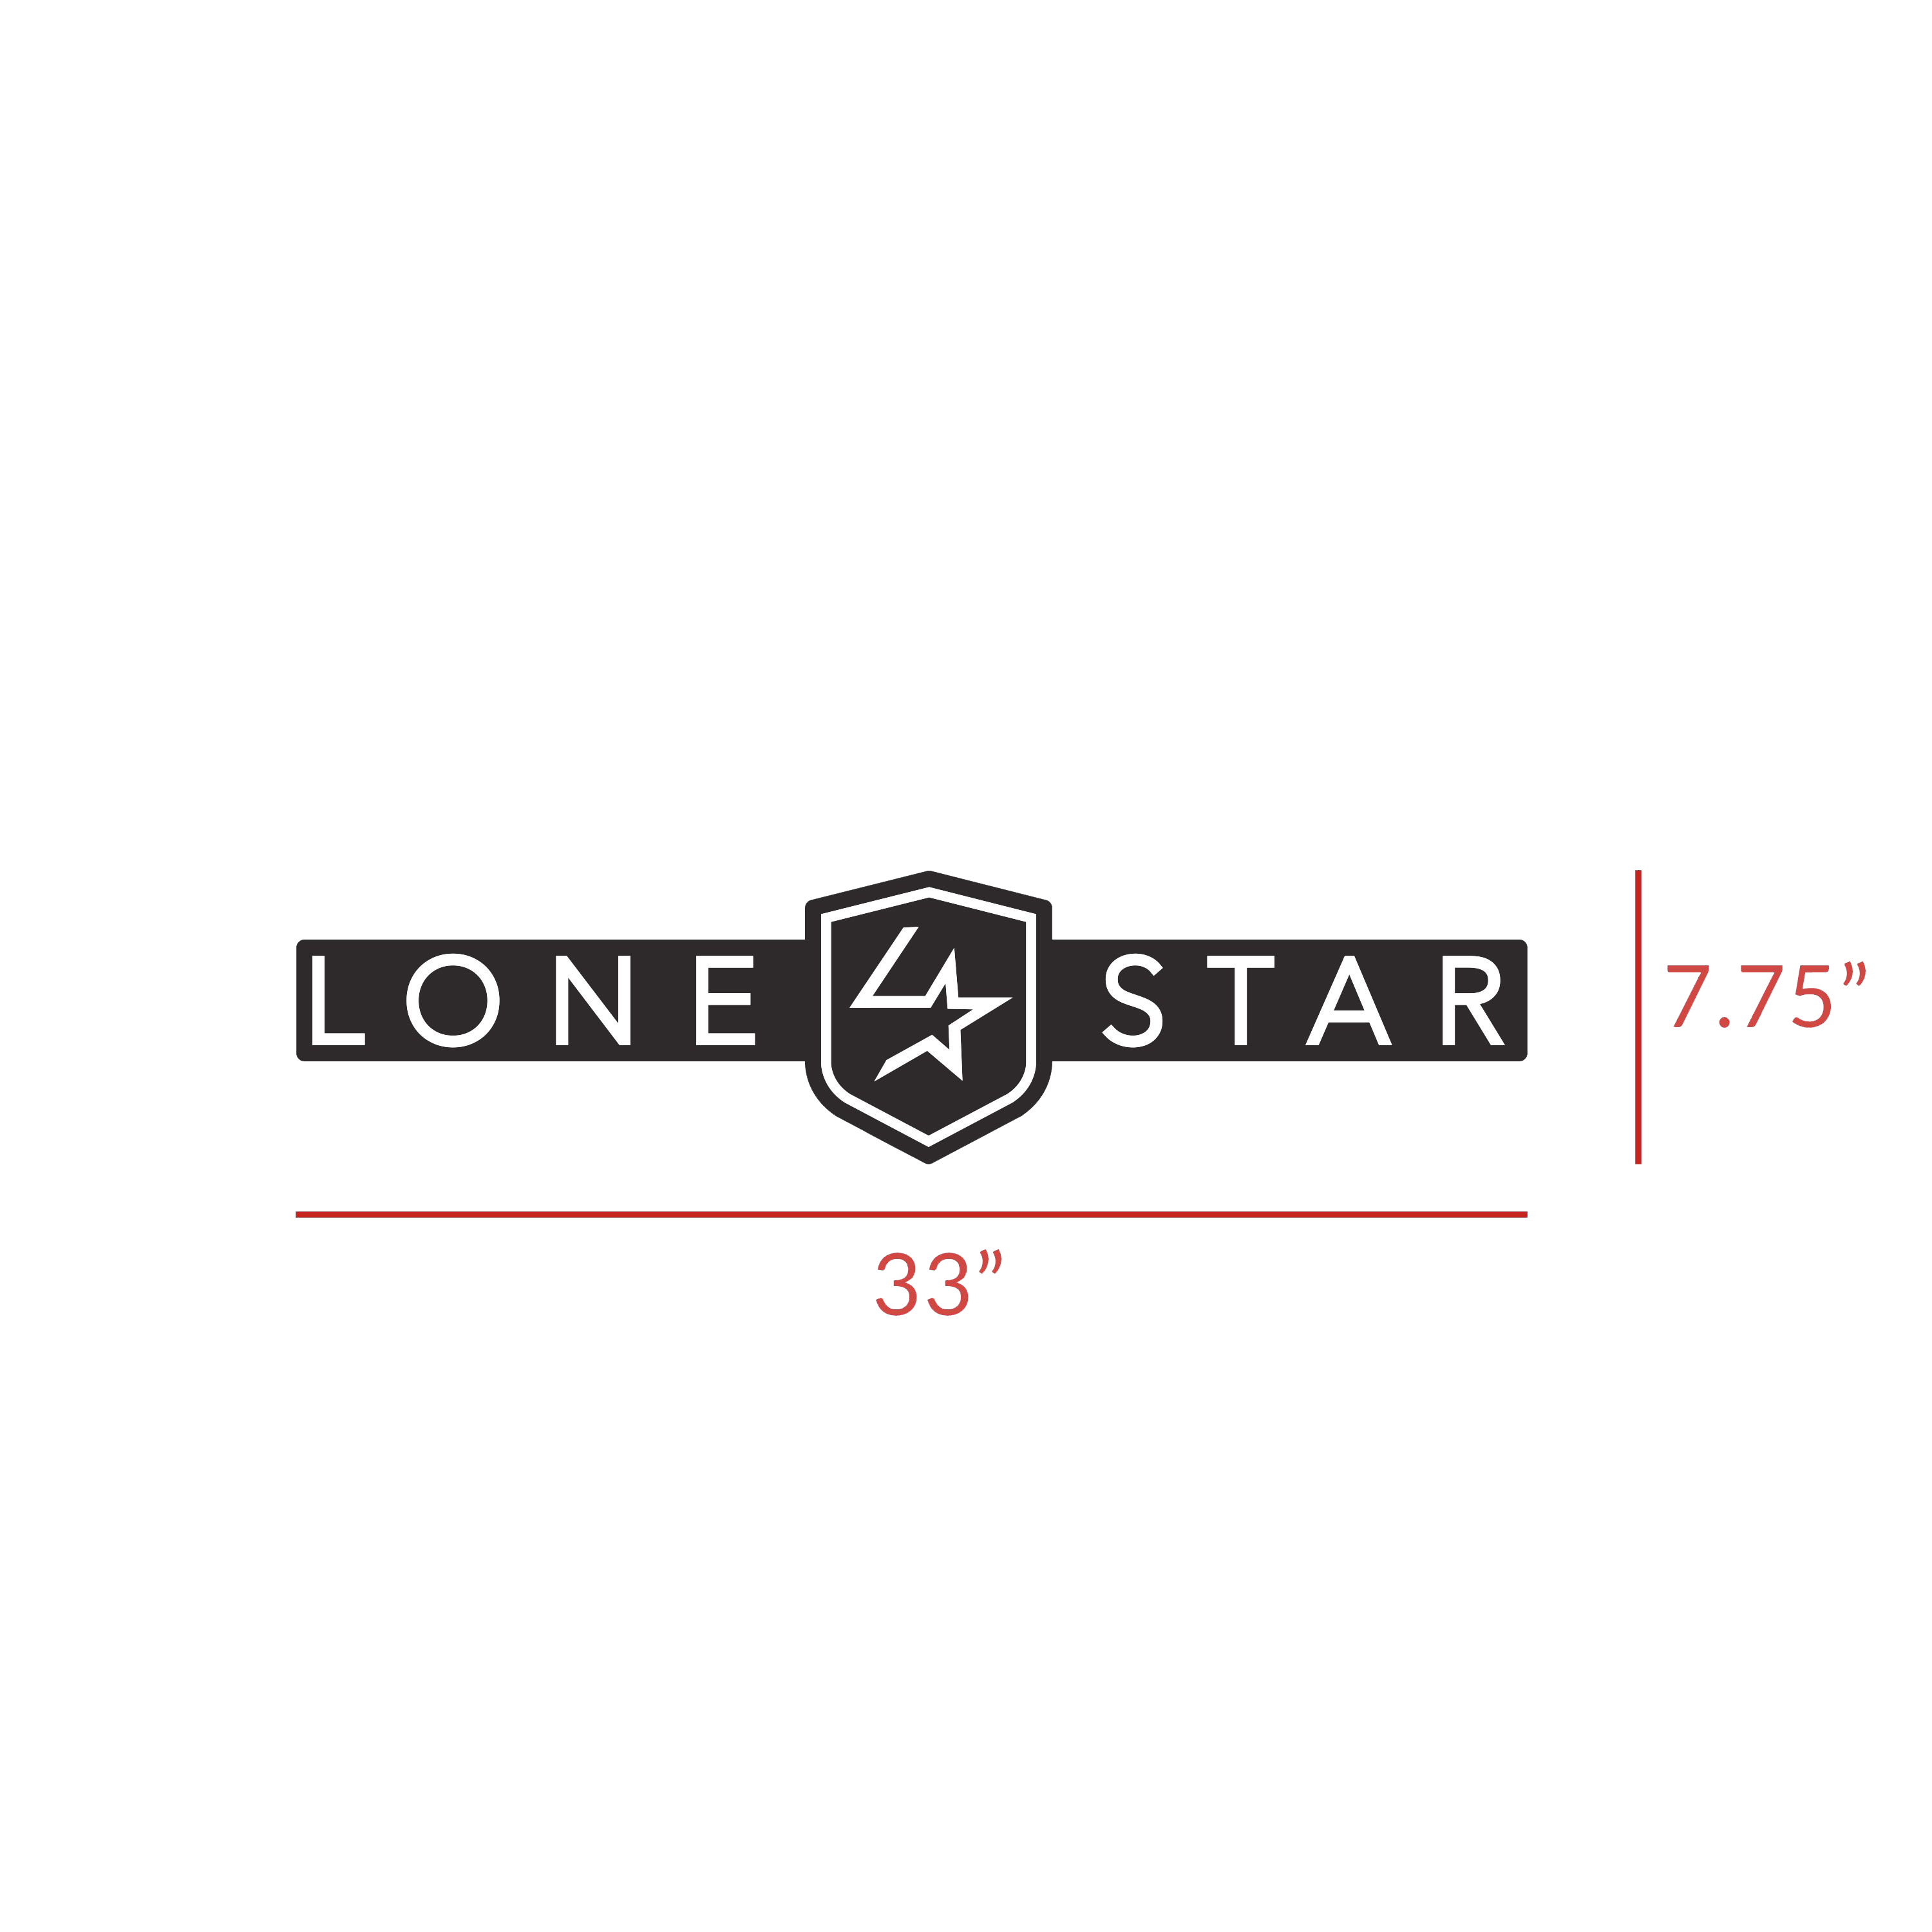 Lone Star Trailer Decal - Back